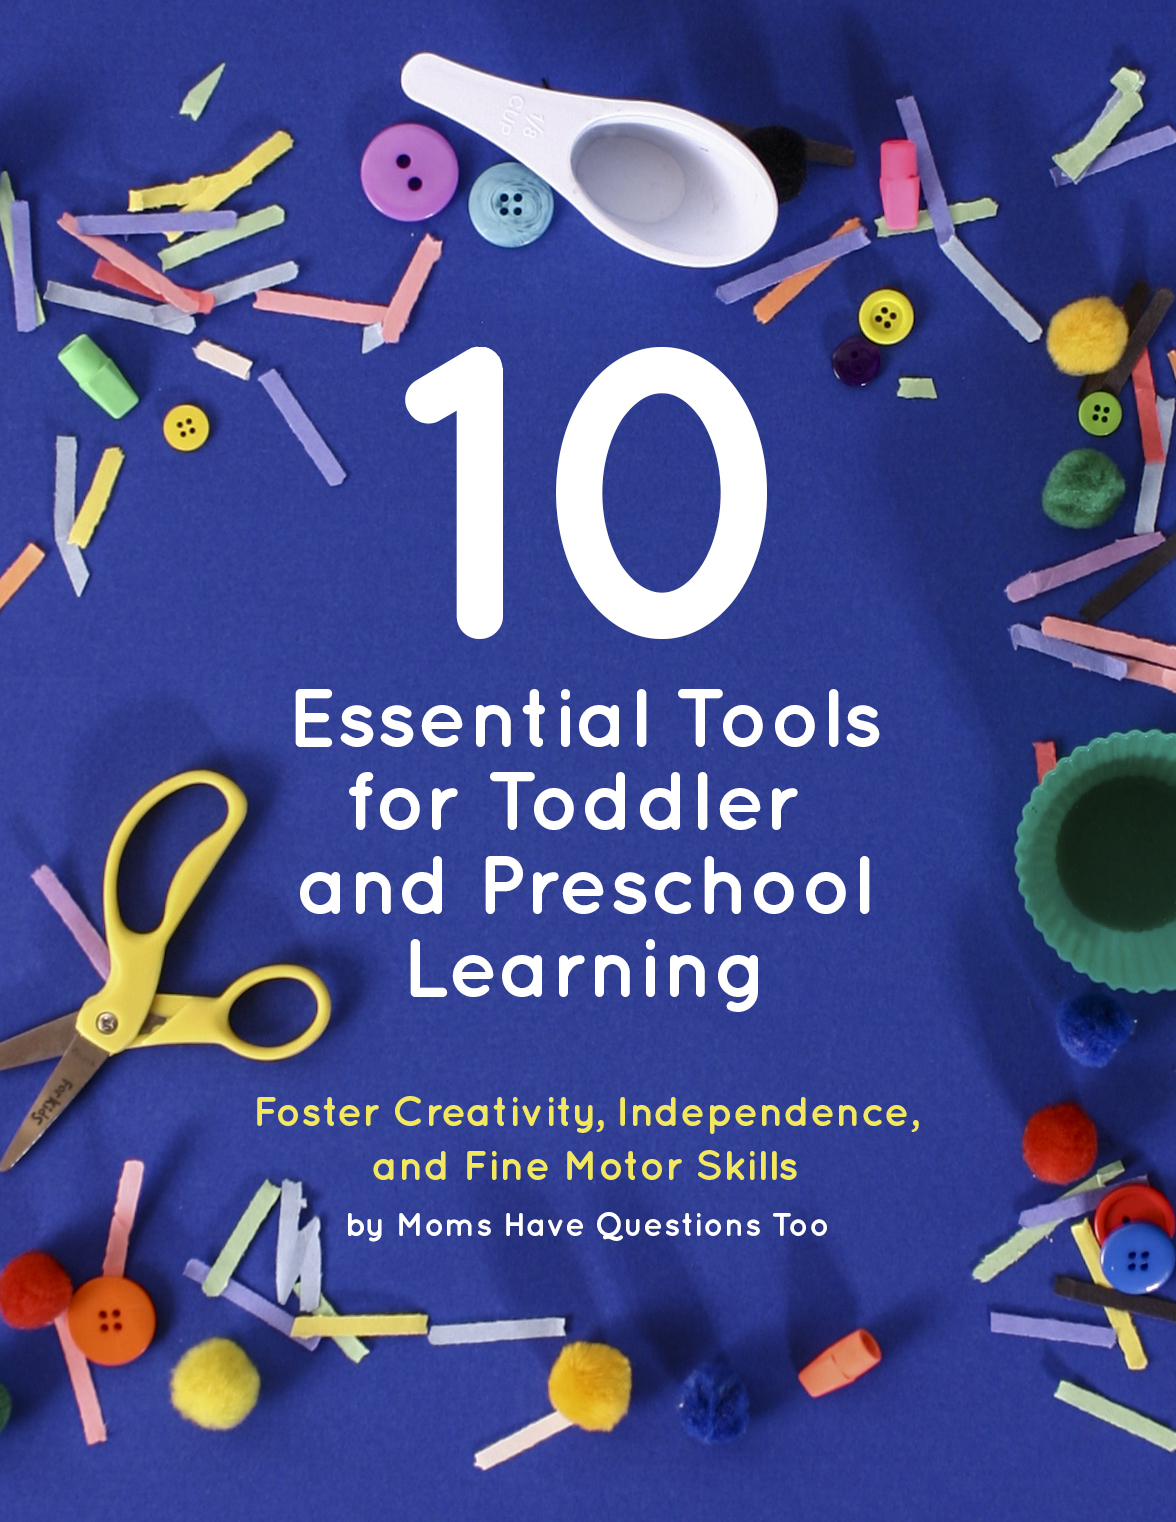 Get this free pdf guide from Moms Have Questions Too and help foster your child's creativity, independance and fine motor skills